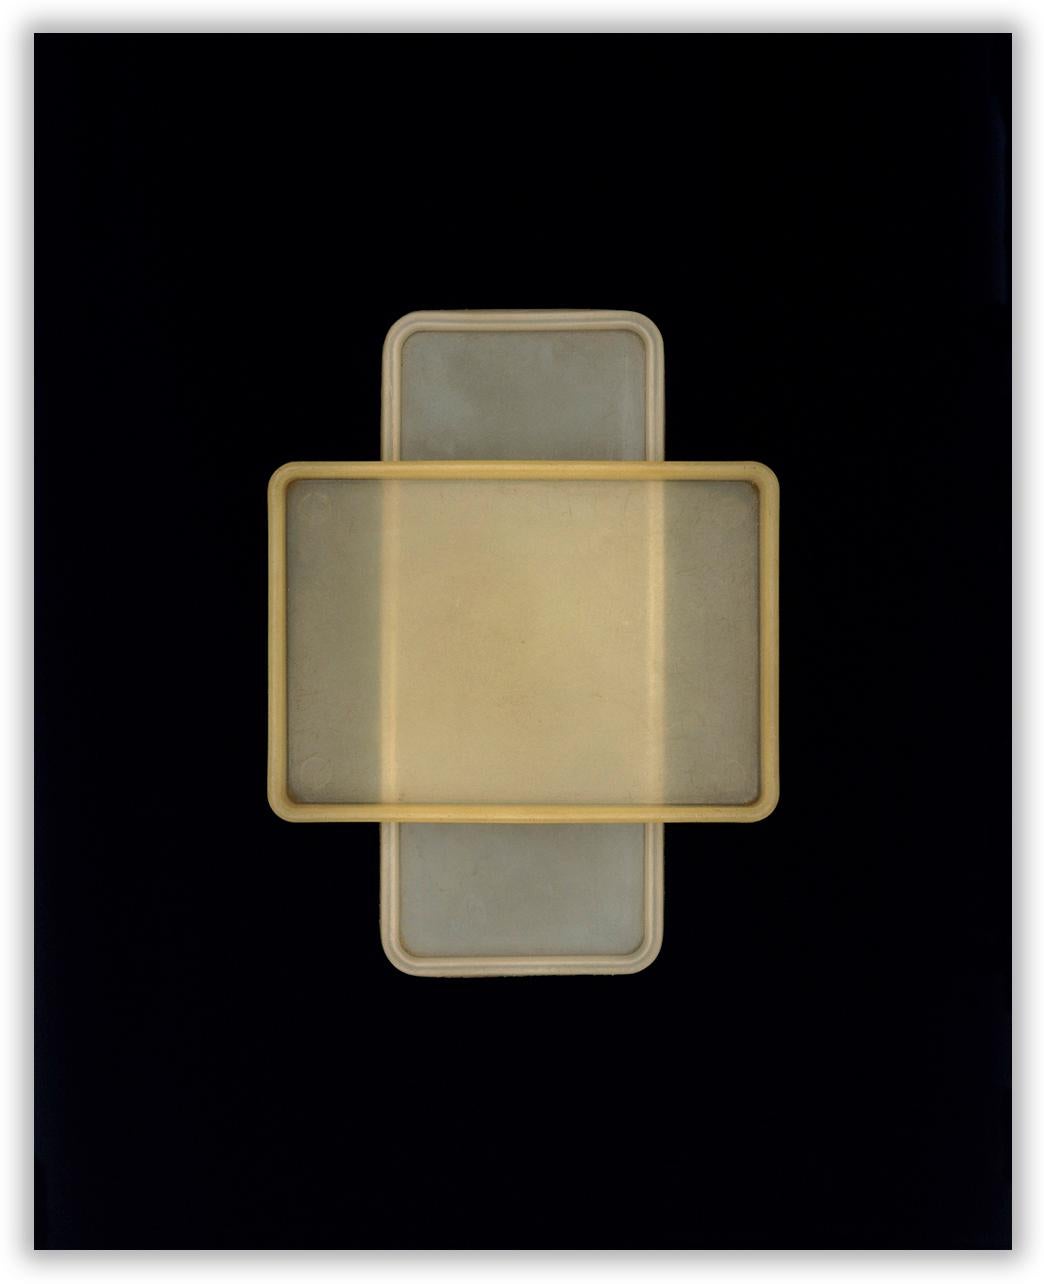 Untitled #2 (Abstract Photography)
C print - Unframed.

"Edition of 5 + 2AP, next 3/5
Richard Caldicott is most well known for this earlier work series which used Tupperware containers as the subject for his photographs.
As he describes :